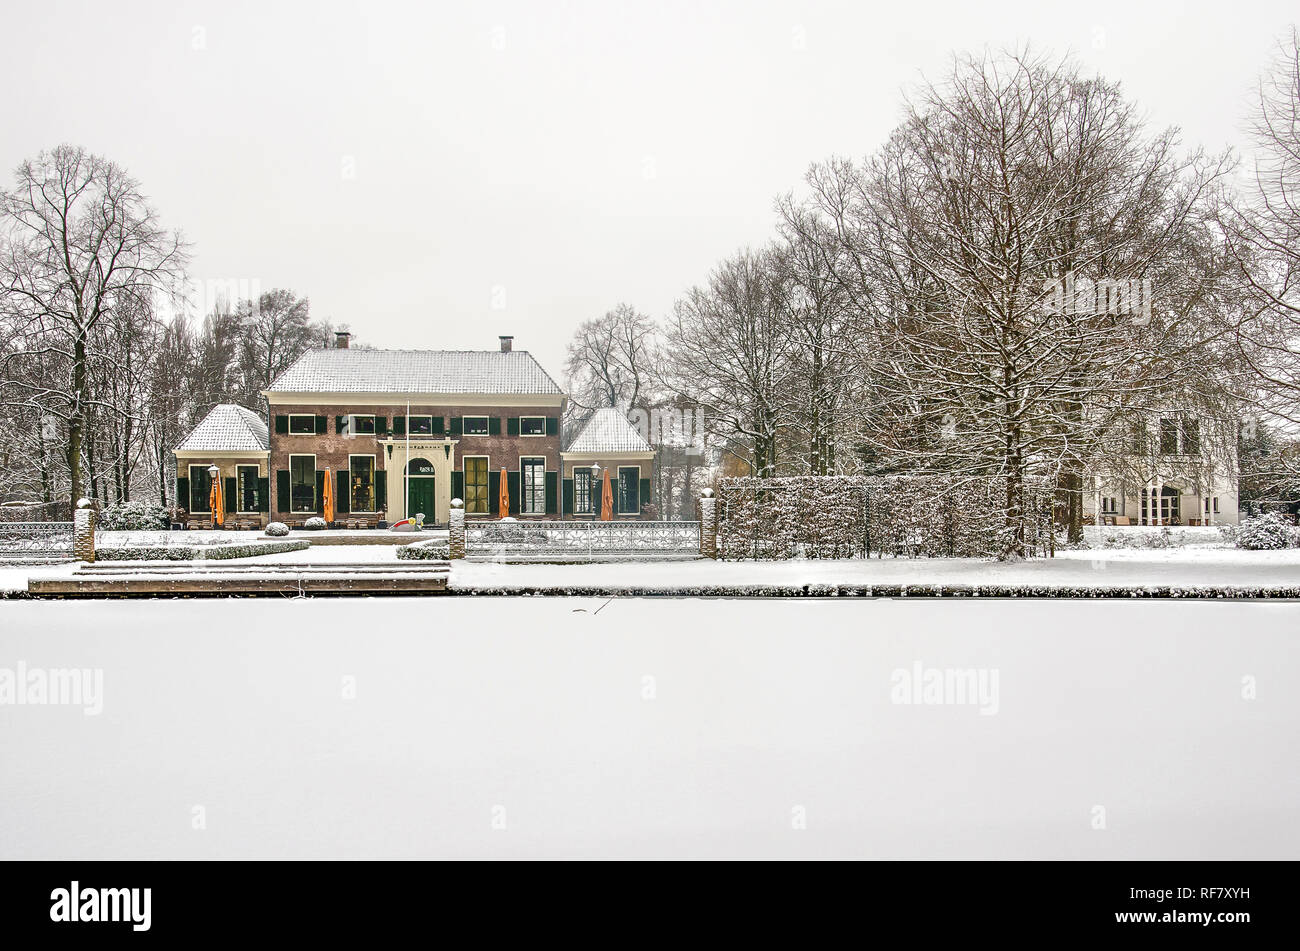 Rotterdam, January 22, 2019: the former Mansion and Coach House, now both restaurants/cafes, in a wintry landscape of the Park, on which snowflakes ar Stock Photo